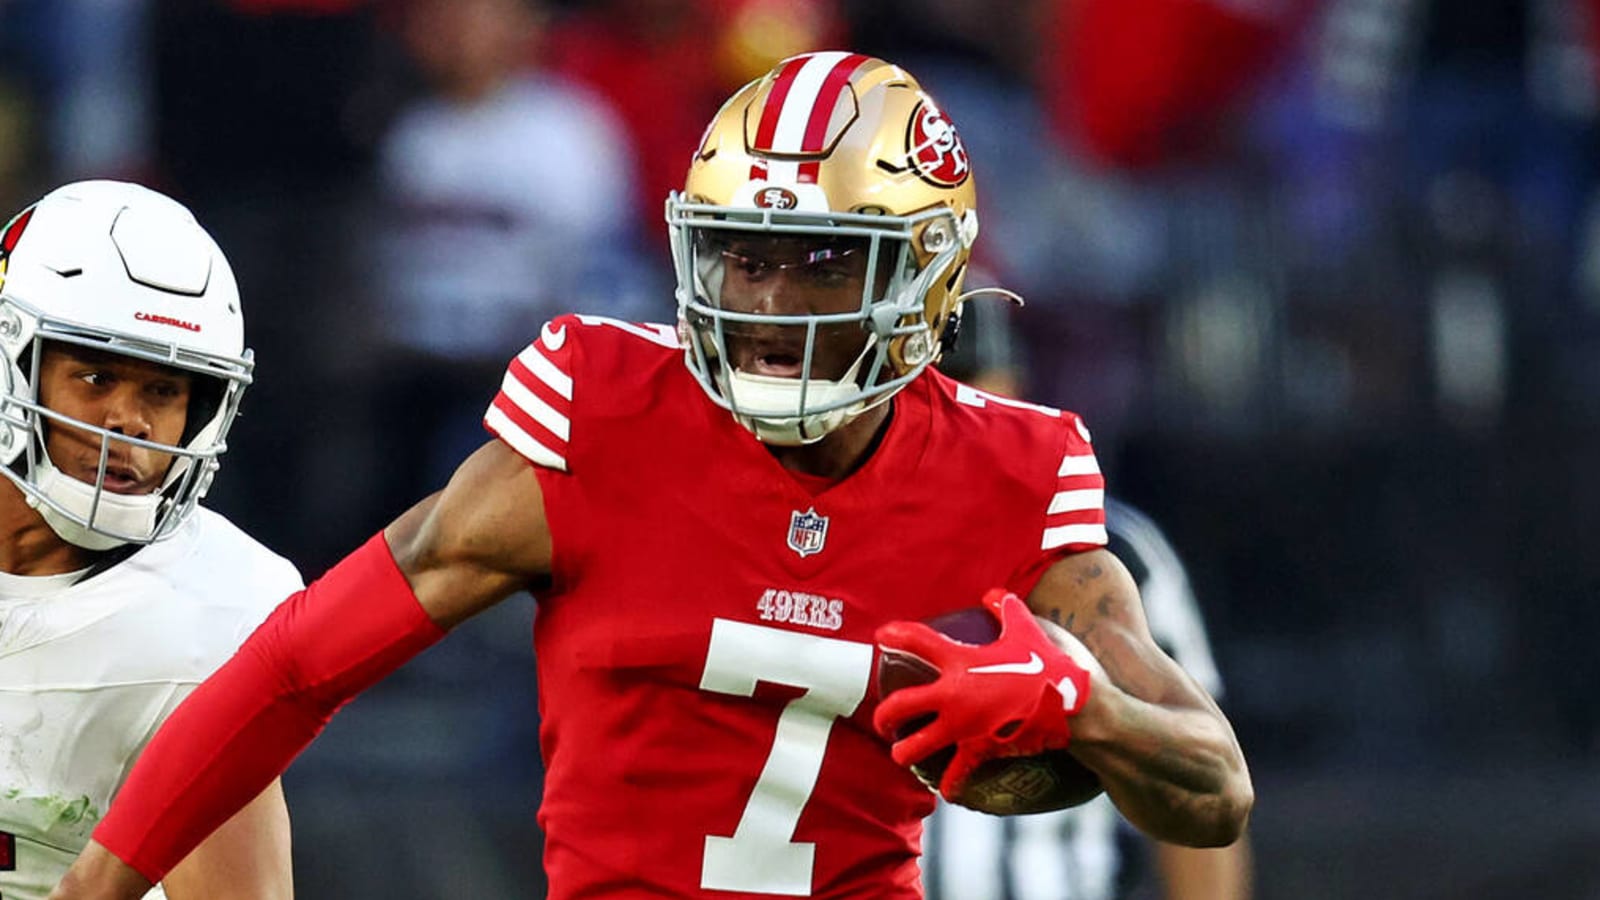 49ers CB reveals the change team made at halftime to shut down Lions